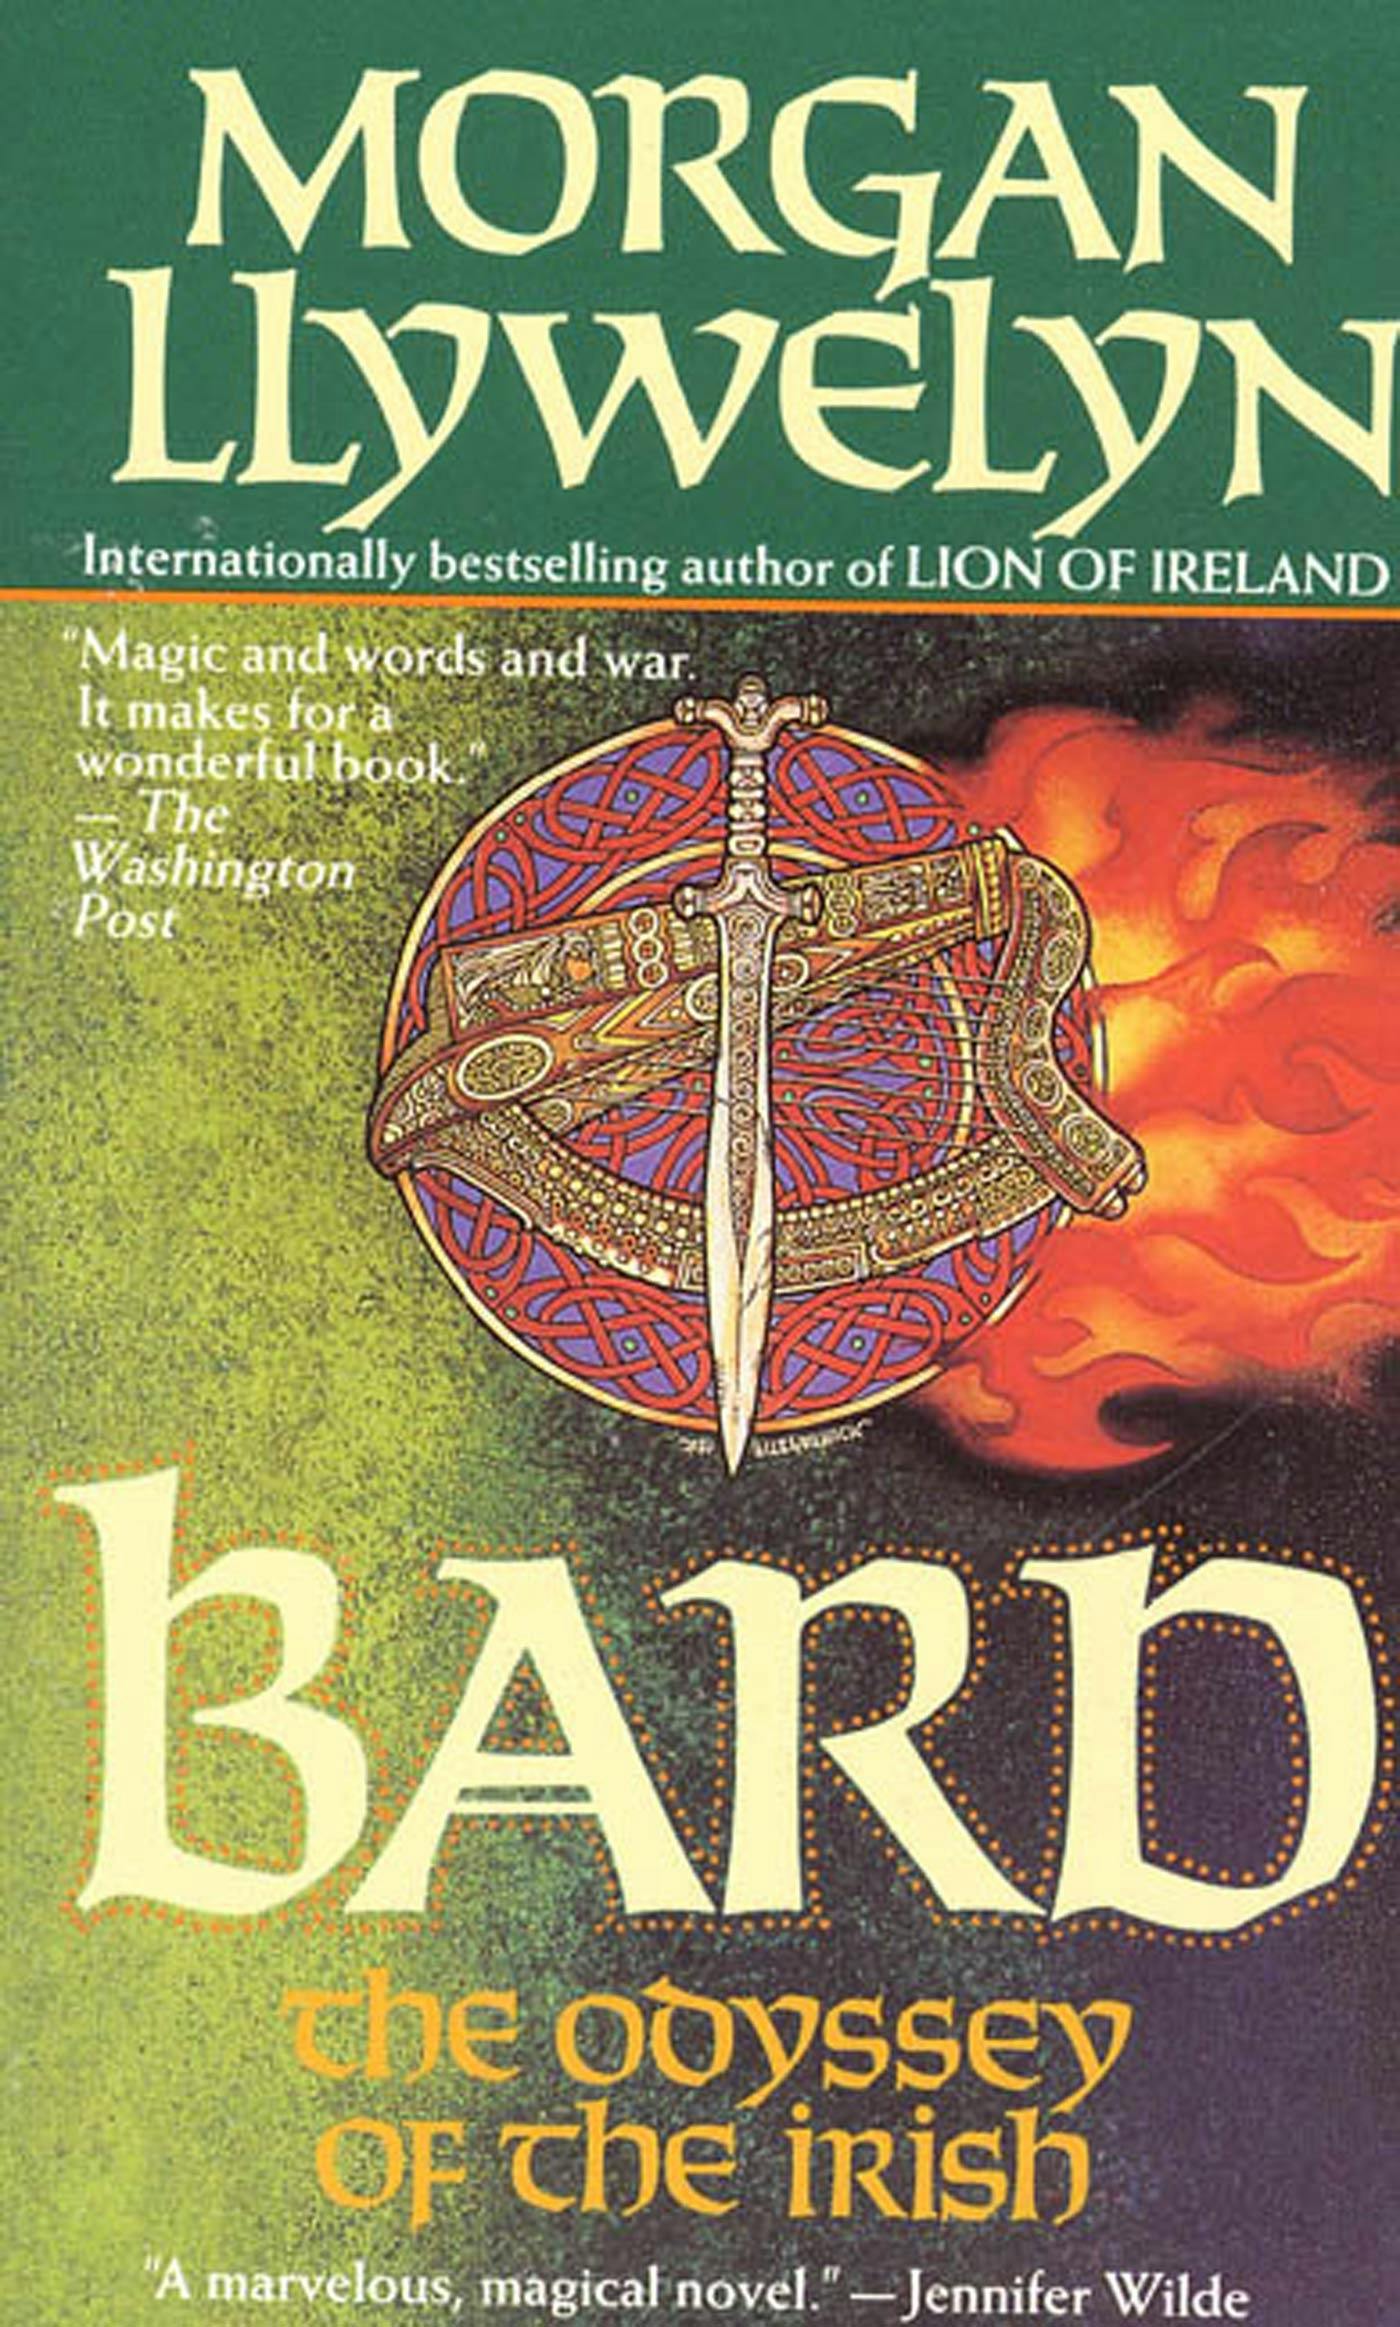 Cover for the book titled as: Bard: The Odyssey of the Irish